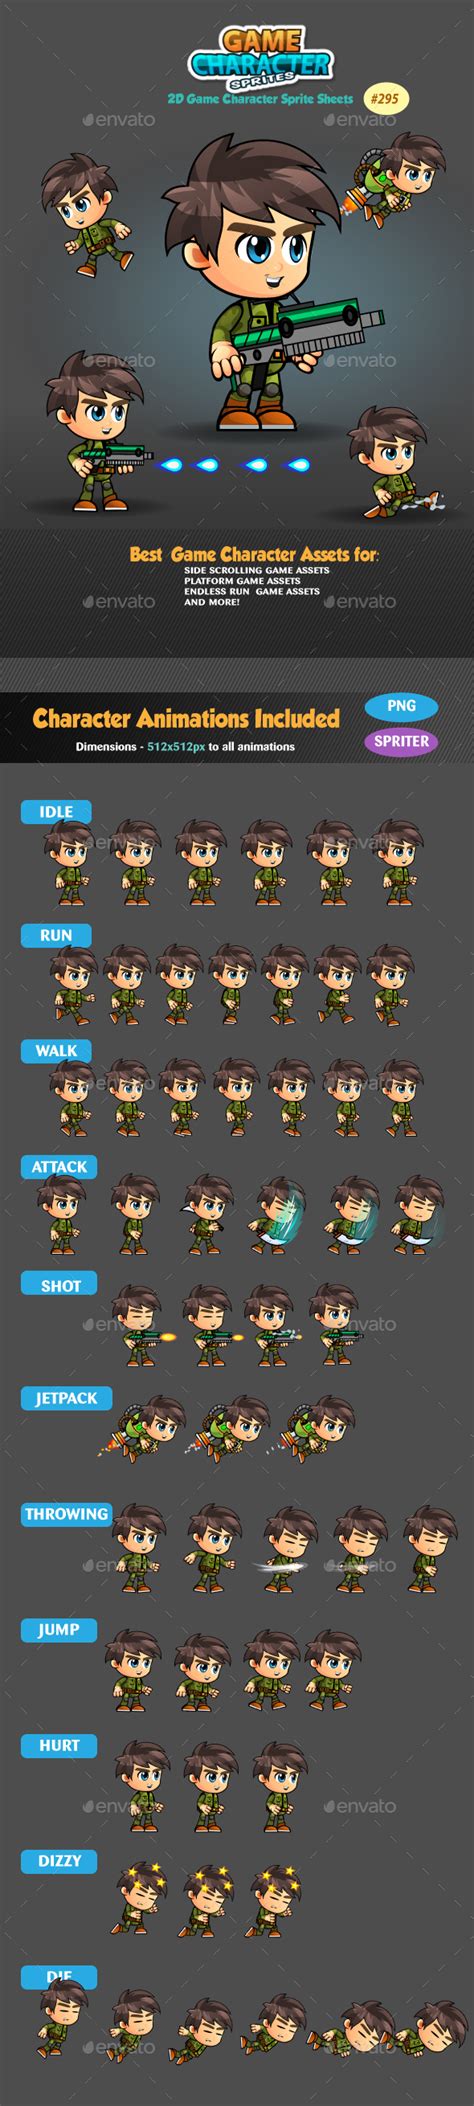 2d game character sprites 295 by pasilan graphicriver